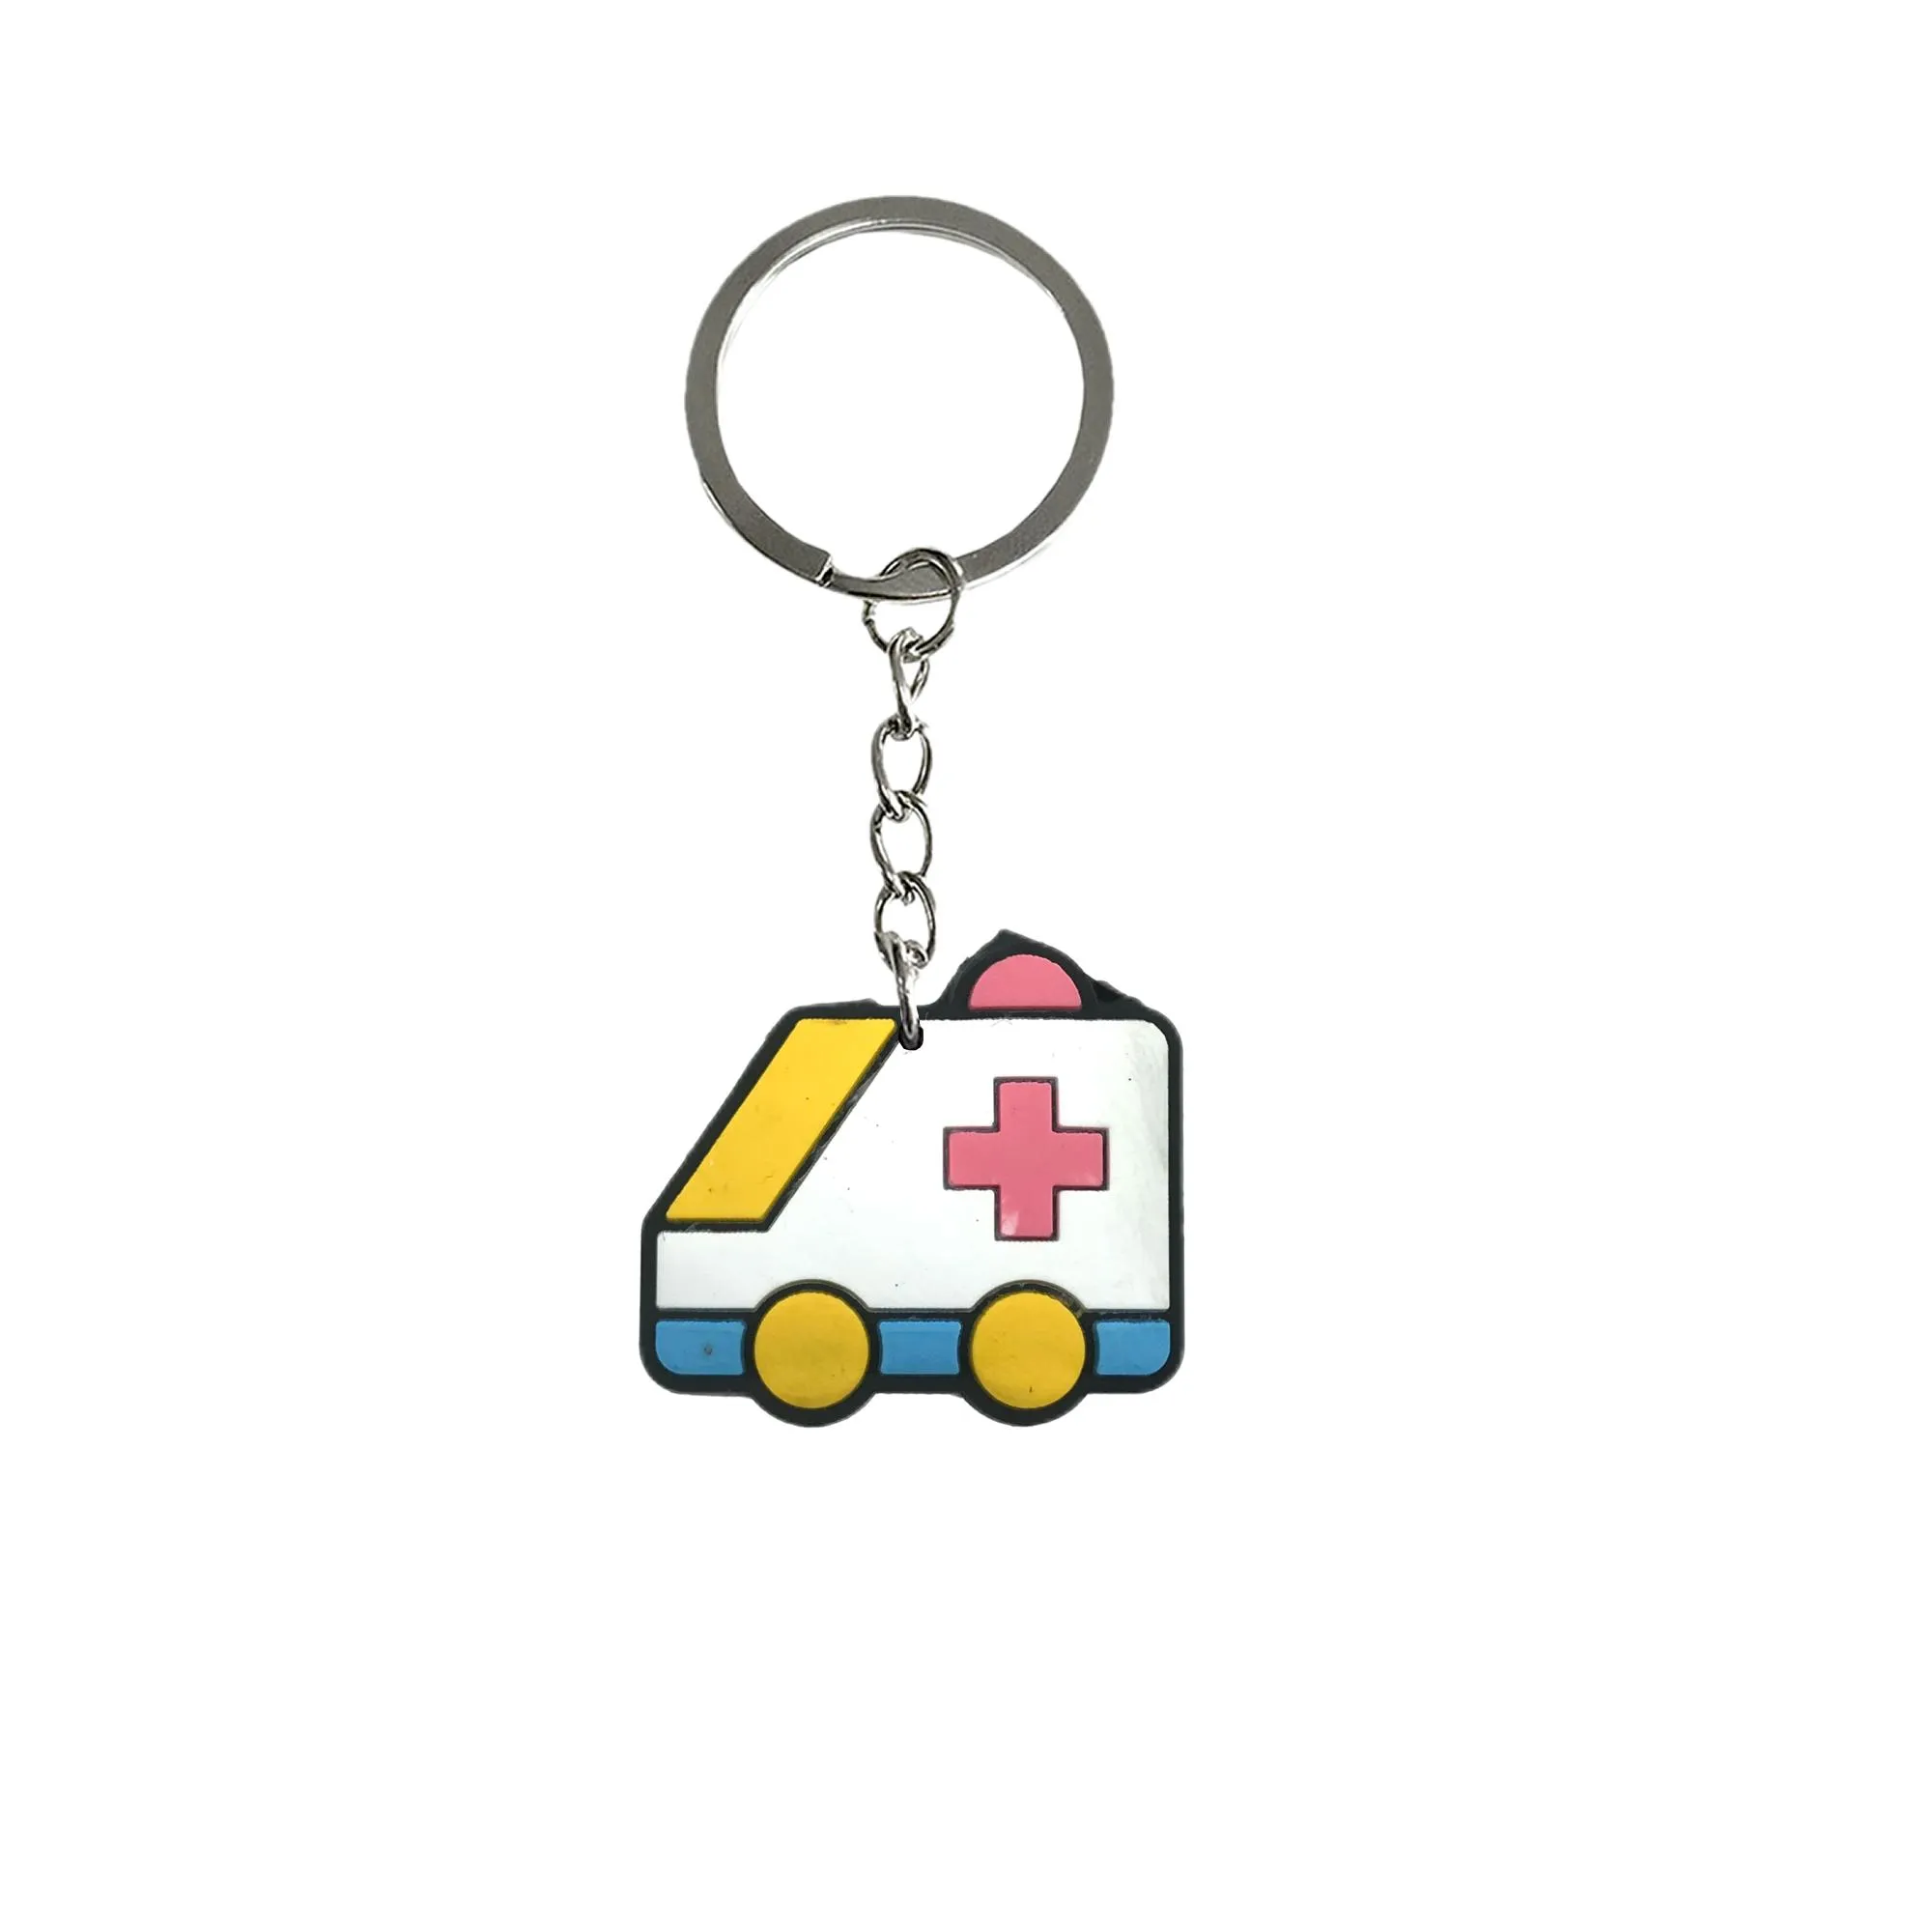 medical 2 keychain keychains for men key ring women chain party favors gift keyring suitable schoolbag car bag backpack couple chains